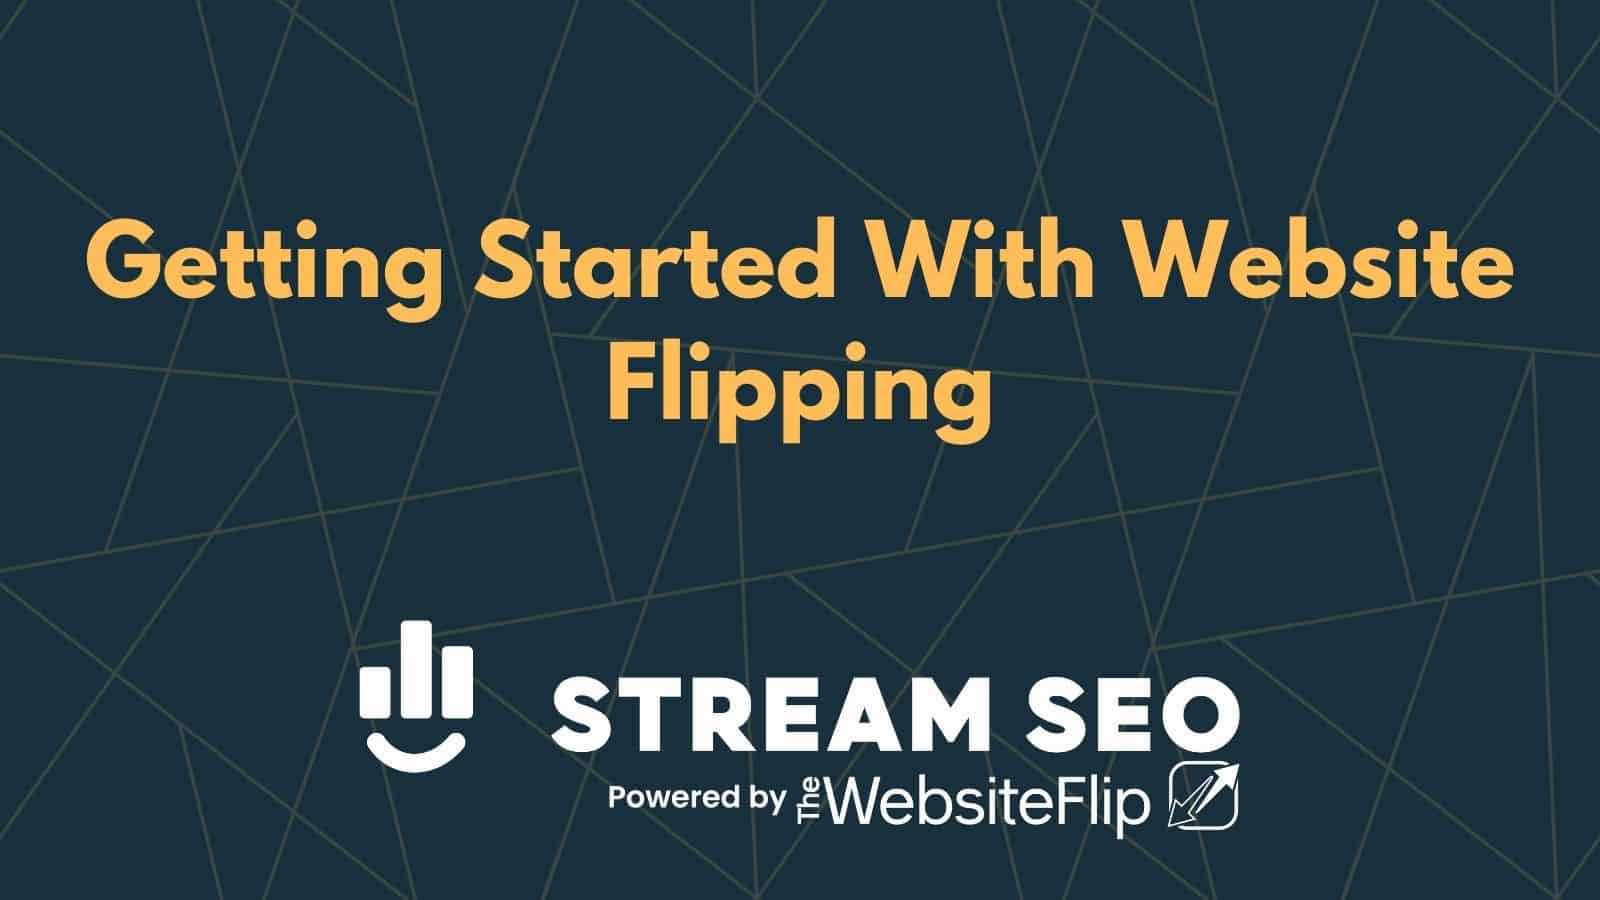 Getting Started With Website Flipping